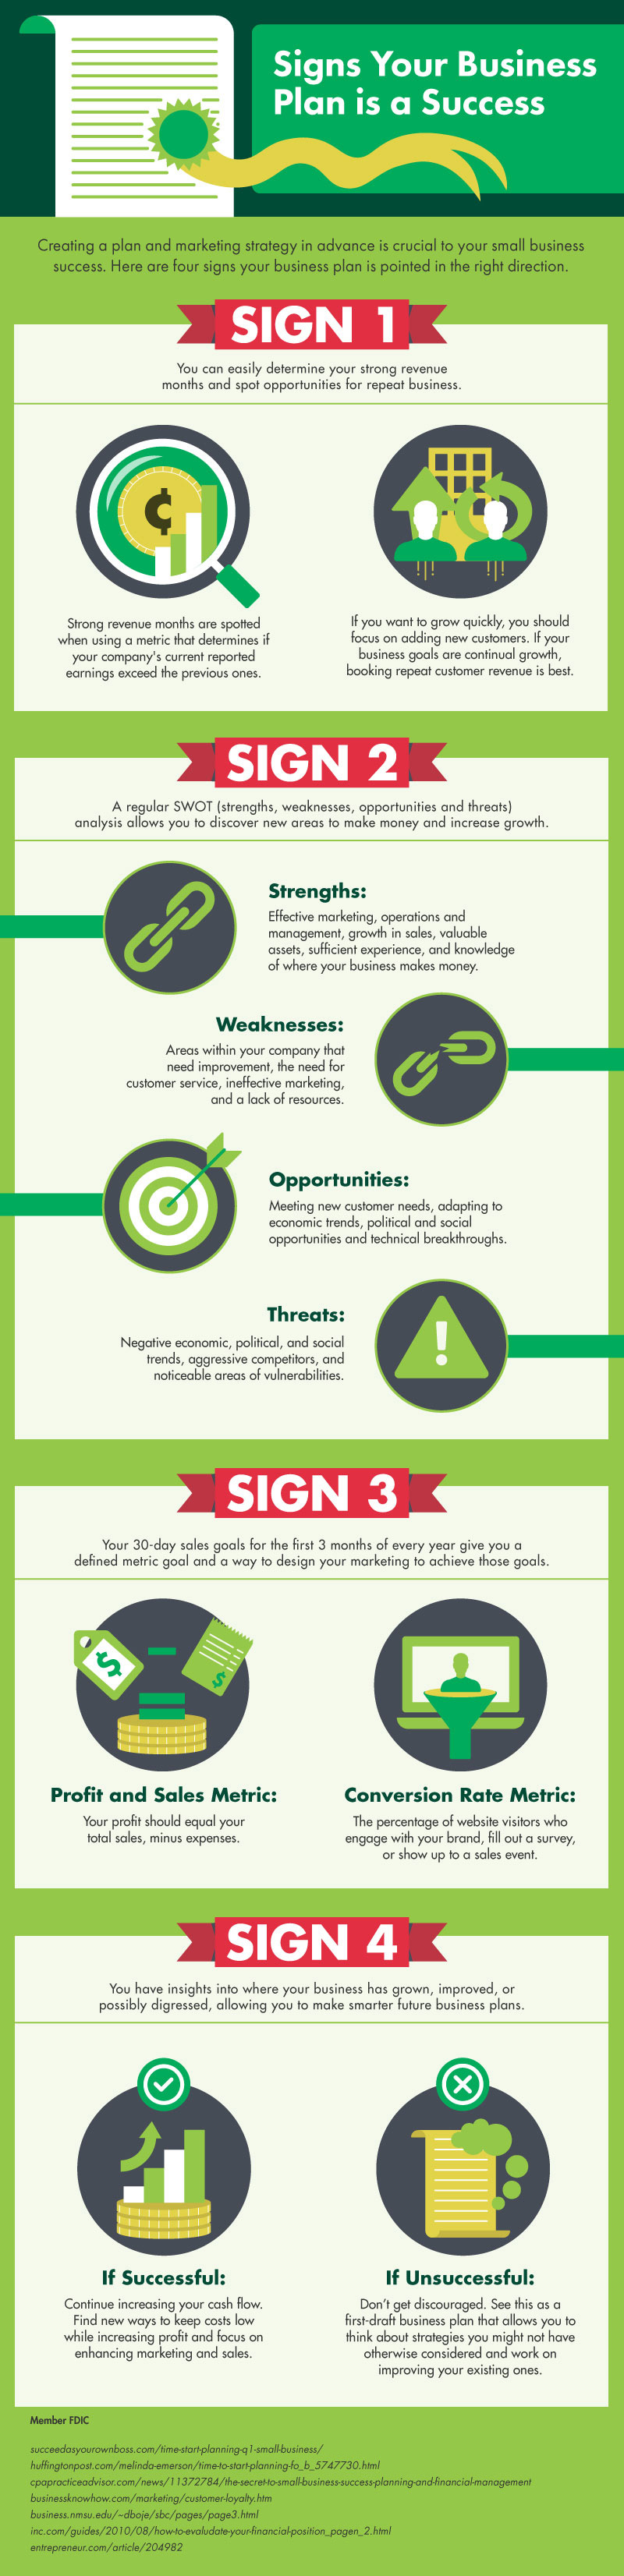 An infographic detailing four signs that your business is successful